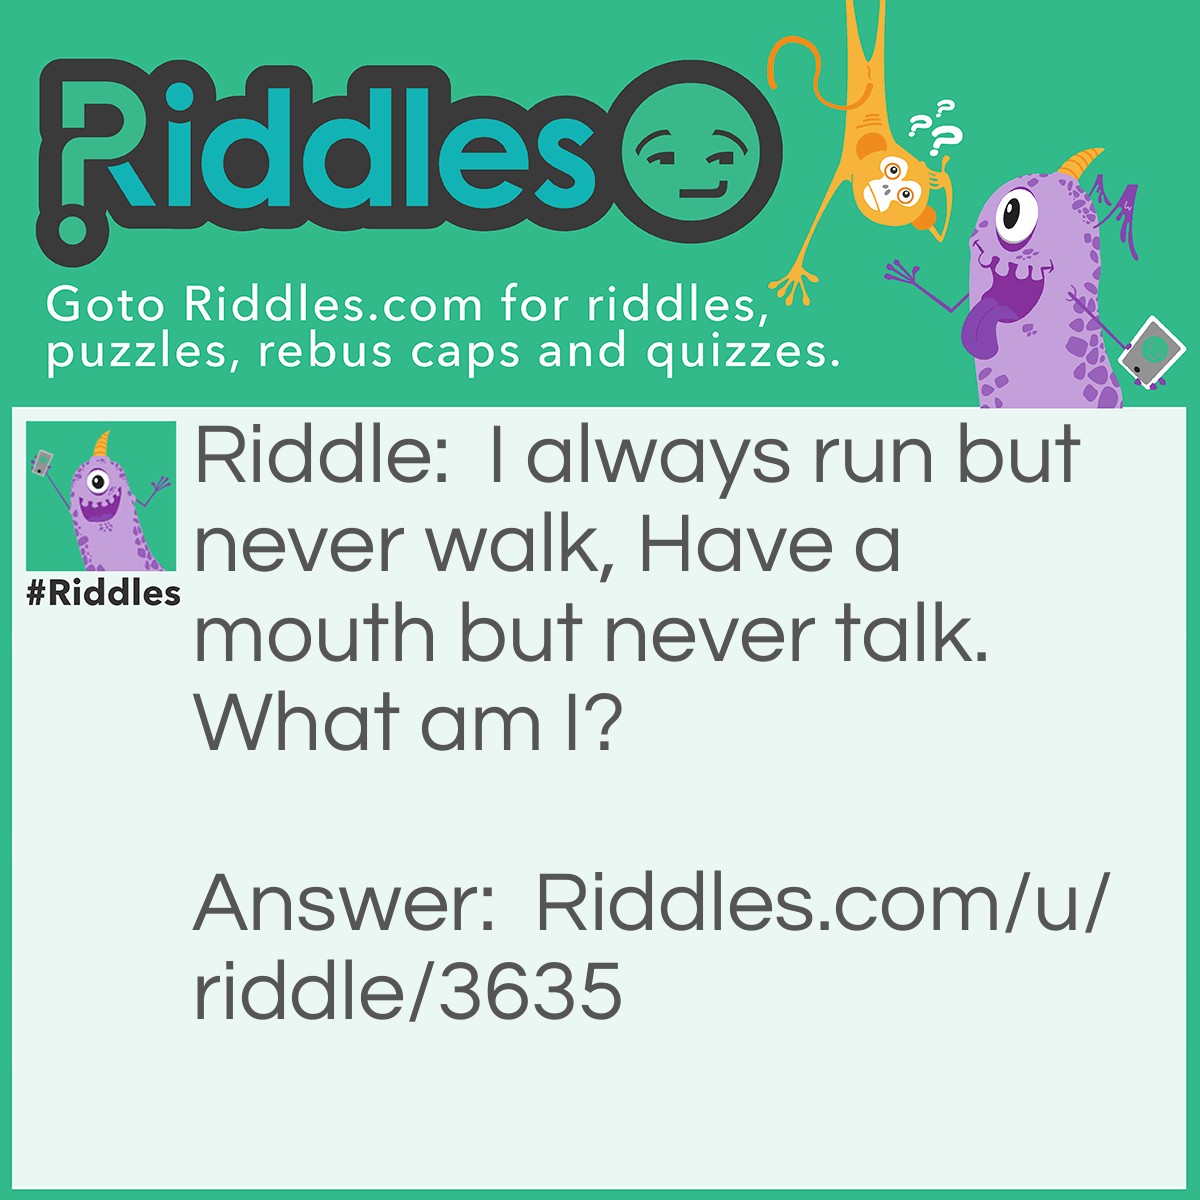 Riddle: I always run but never walk, Have a mouth but never talk. What am I? Answer: A River.